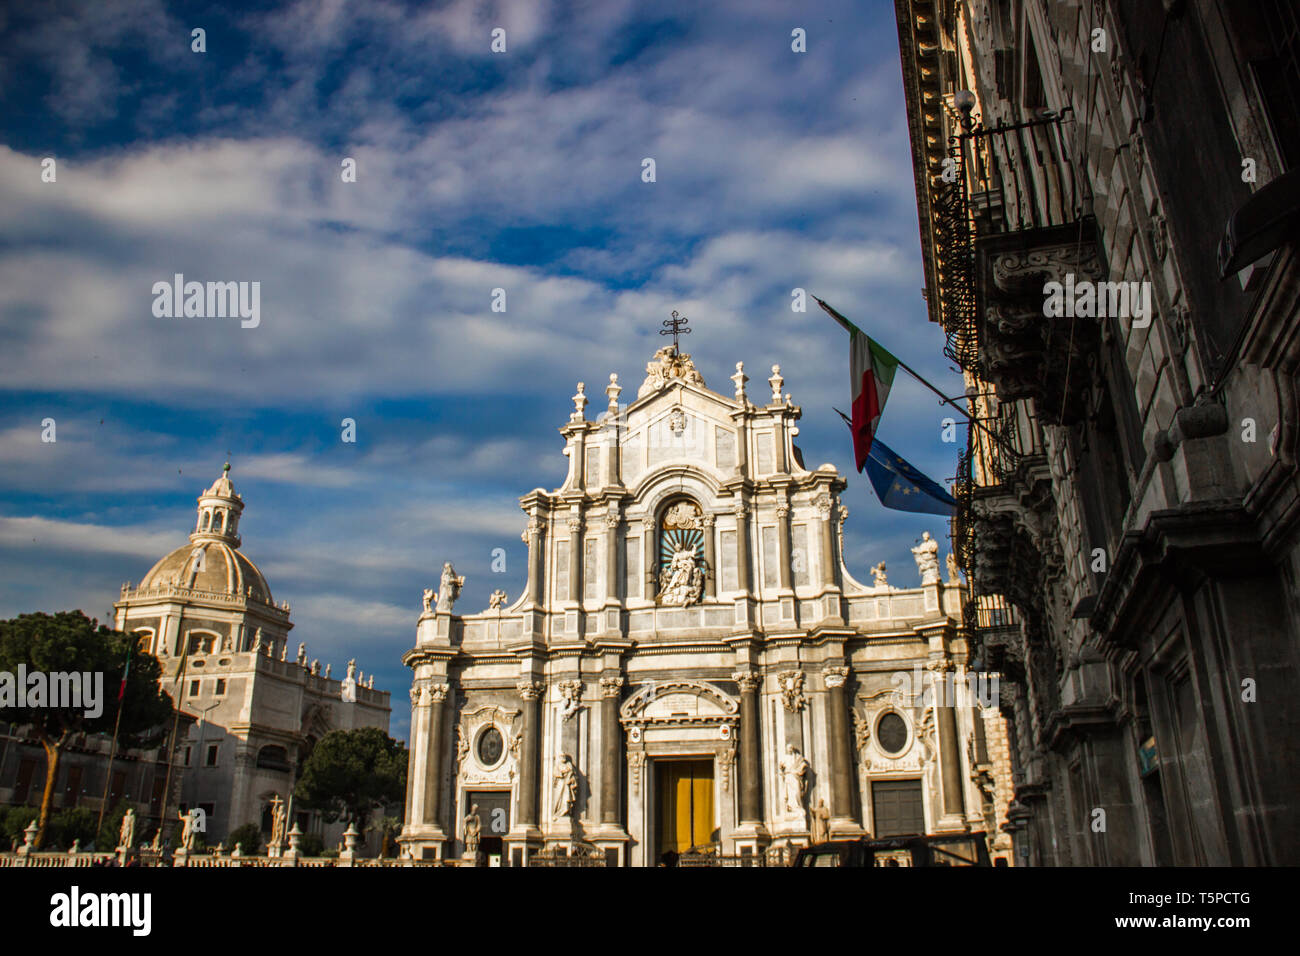 Catania cathedral front view with baroque architecture building and dome Stock Photo